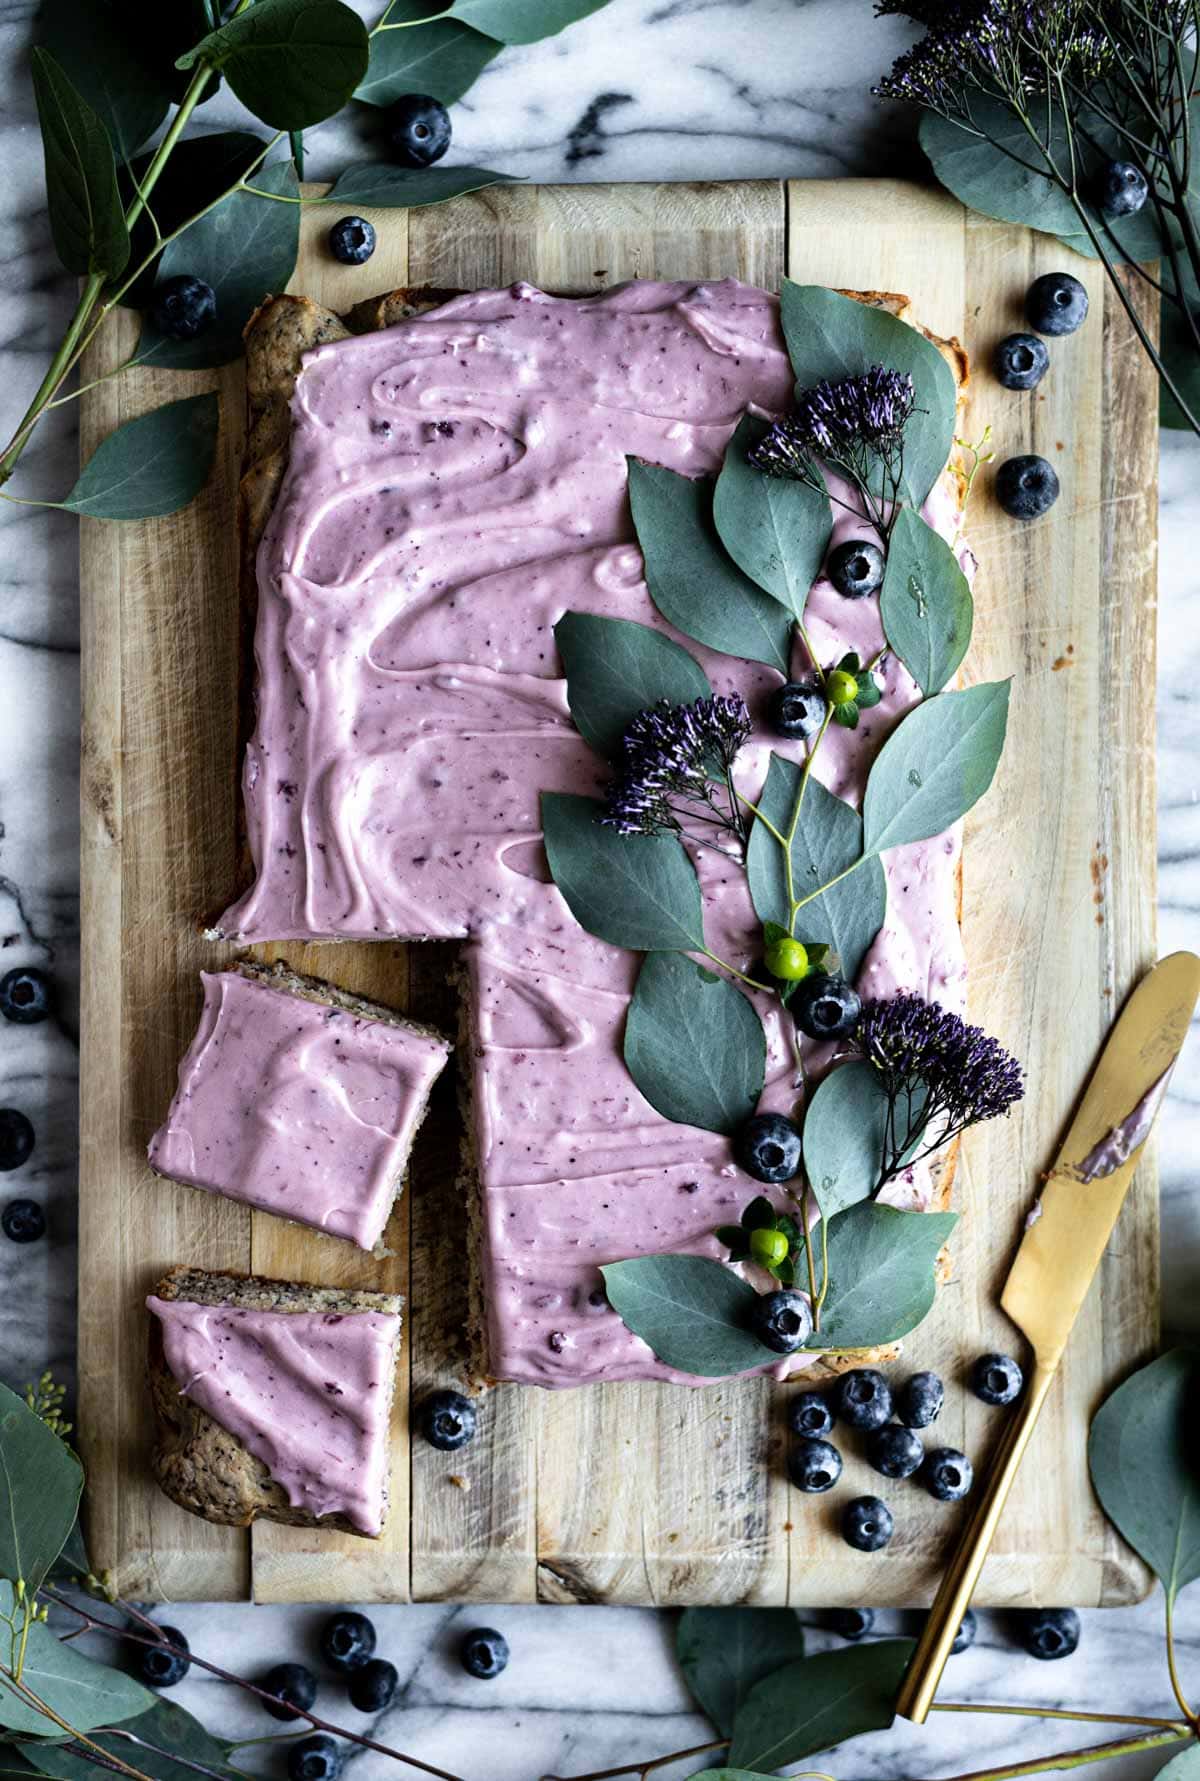 Blueberry sheet cake on a wood cutting board and decorated with blueberries and vines.